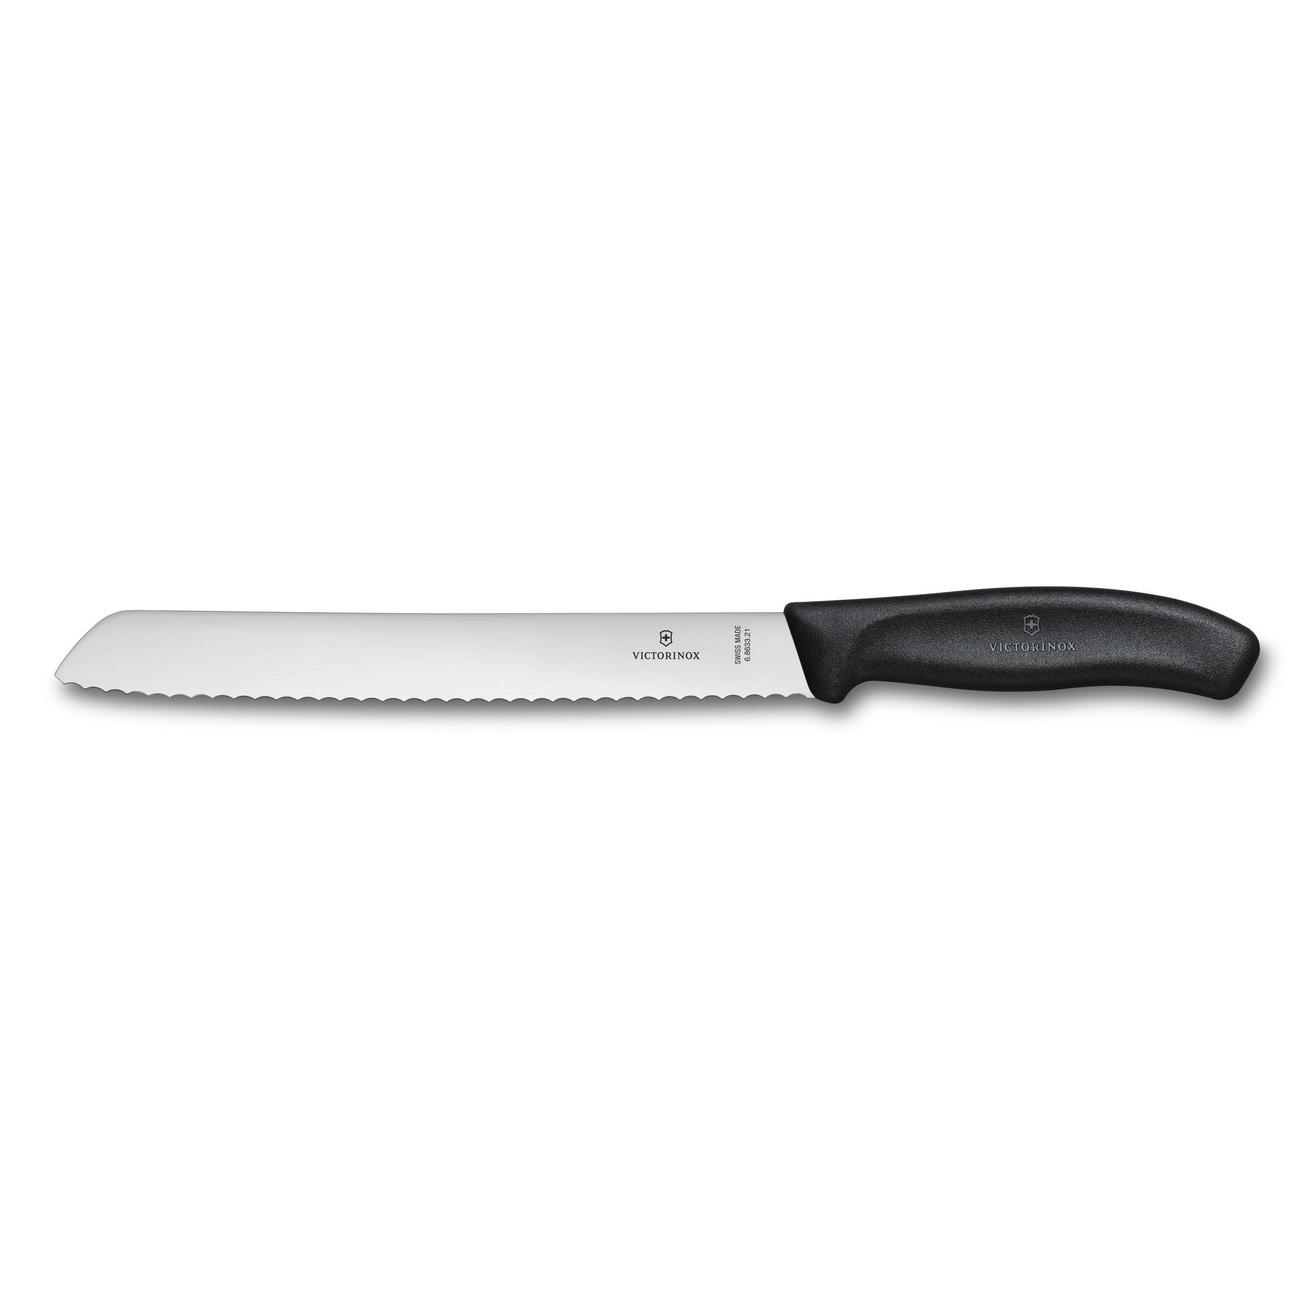 https://www.thekitchenwhisk.ie/contentFiles/productImages/Large/ClassicBreadKnife.jpg